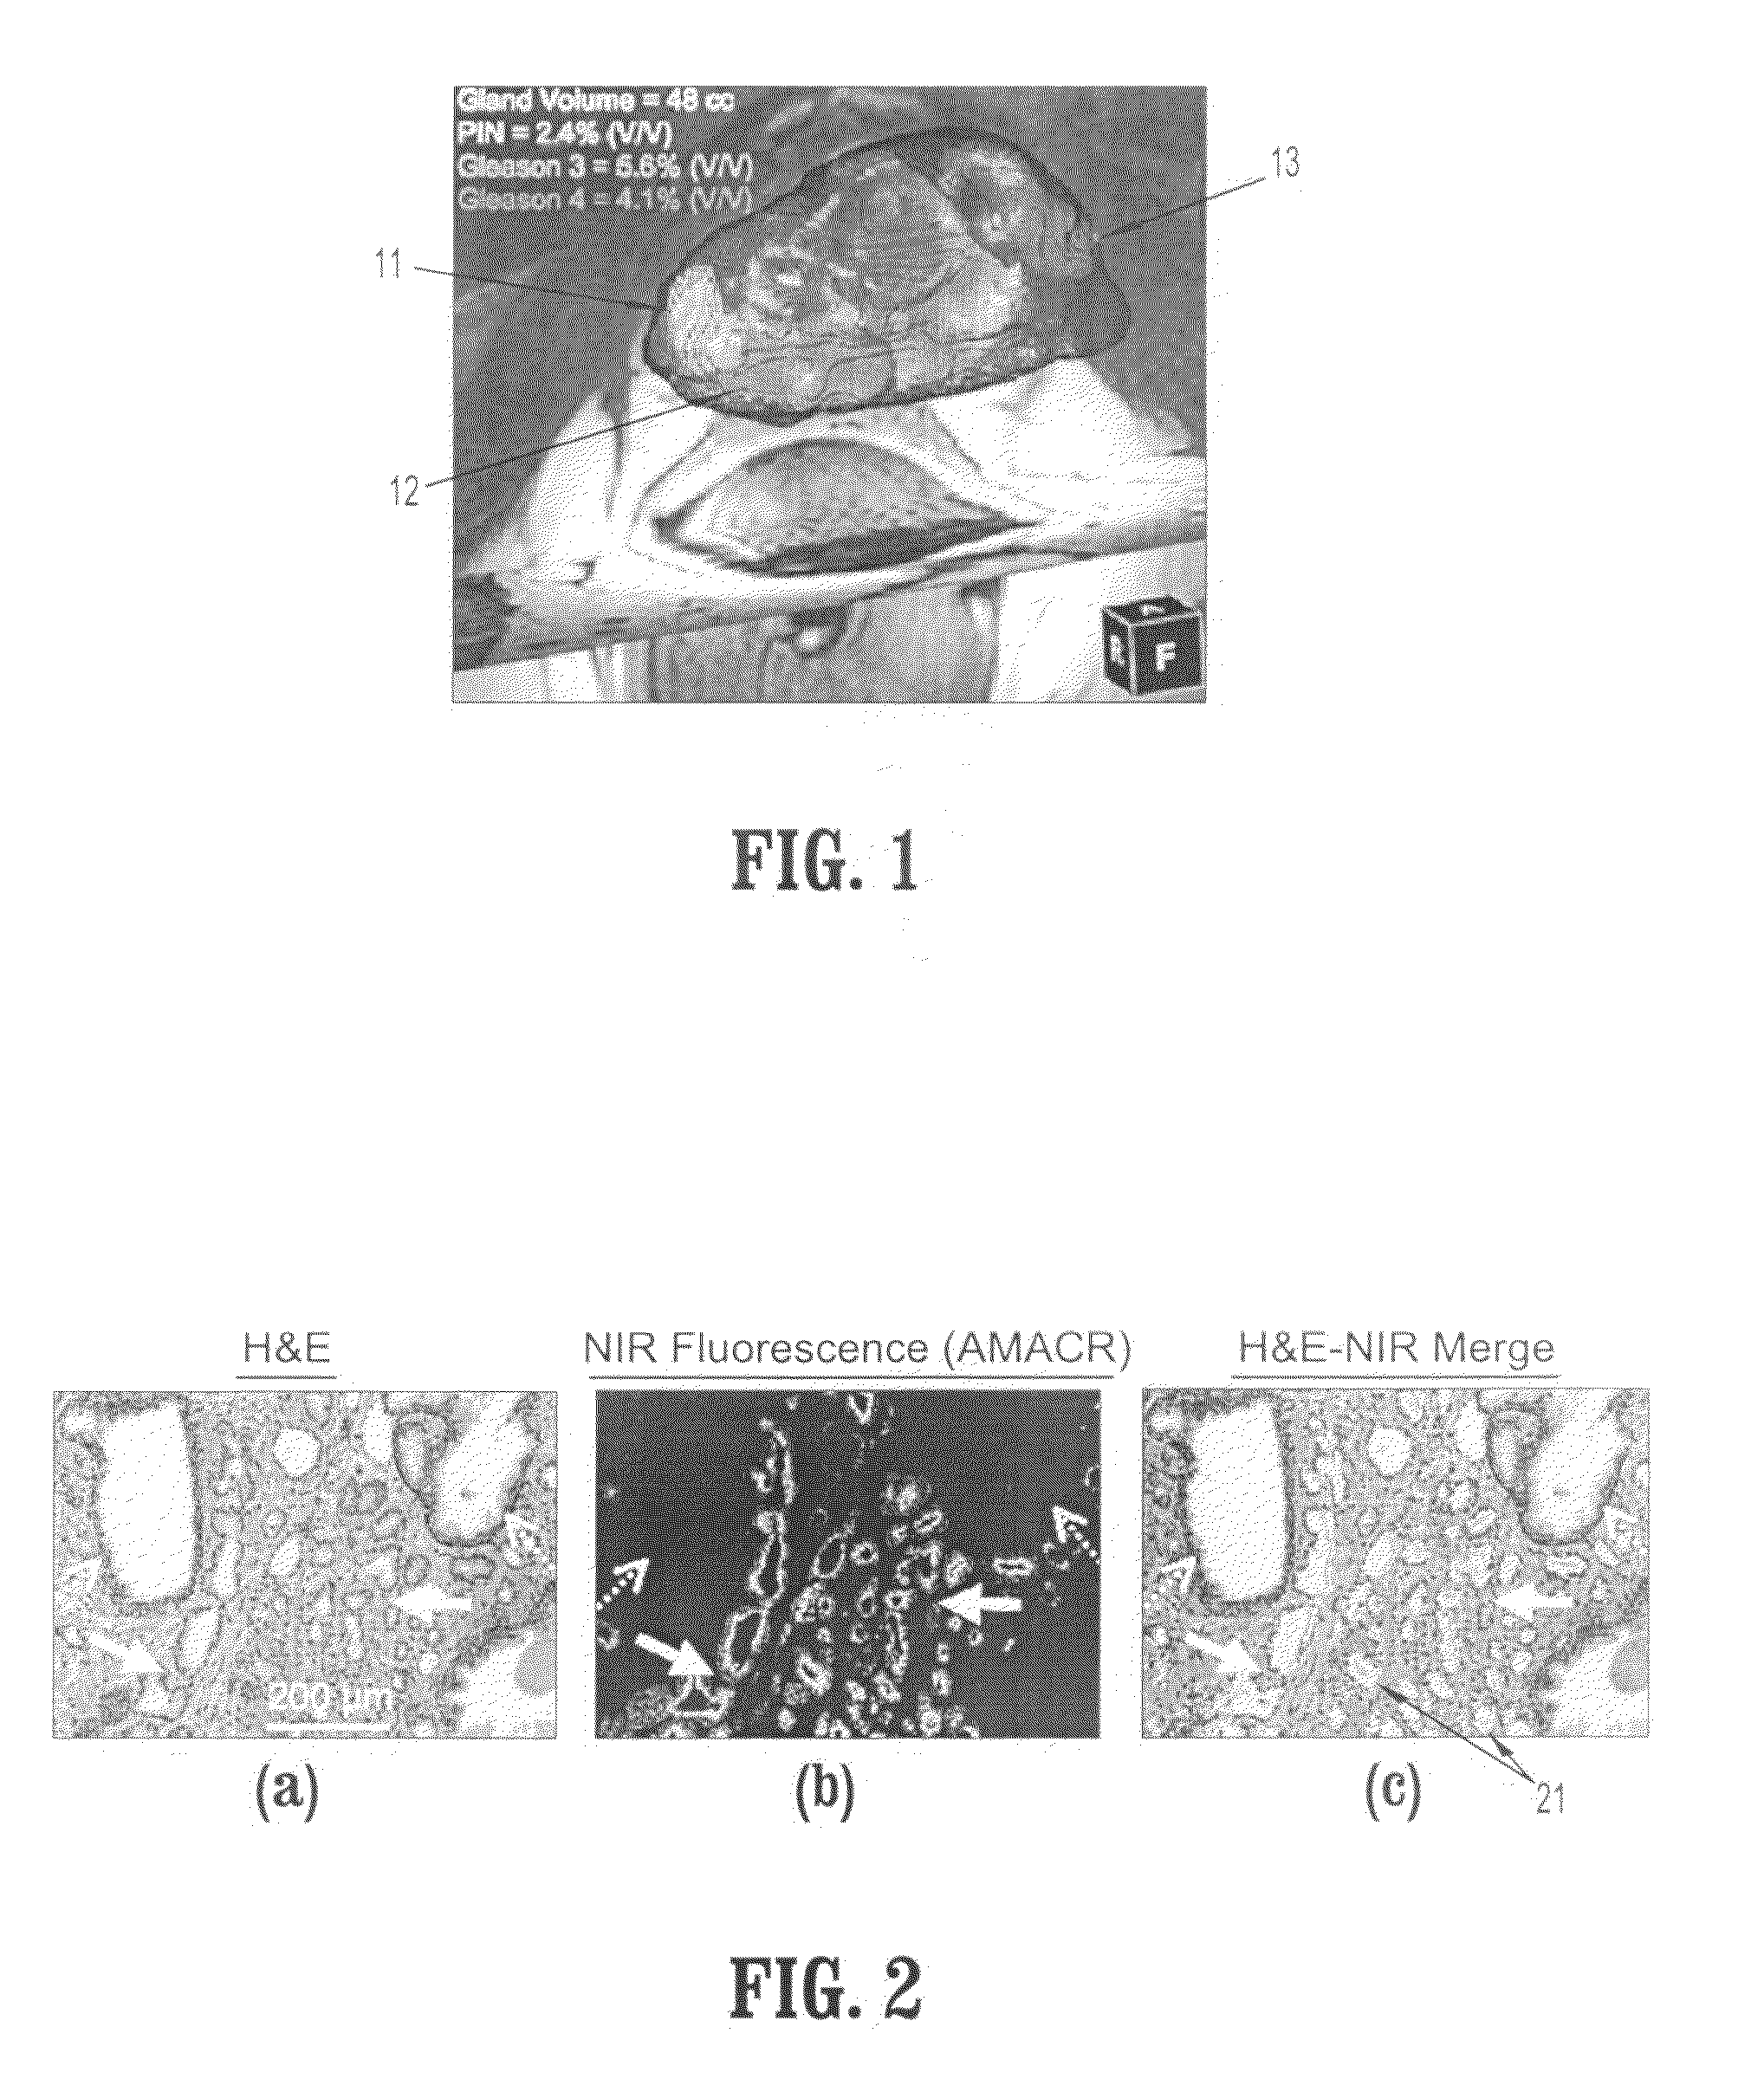 System and method for unsupervised detection and gleason grading of prostate cancer whole mounts using NIR fluorscence